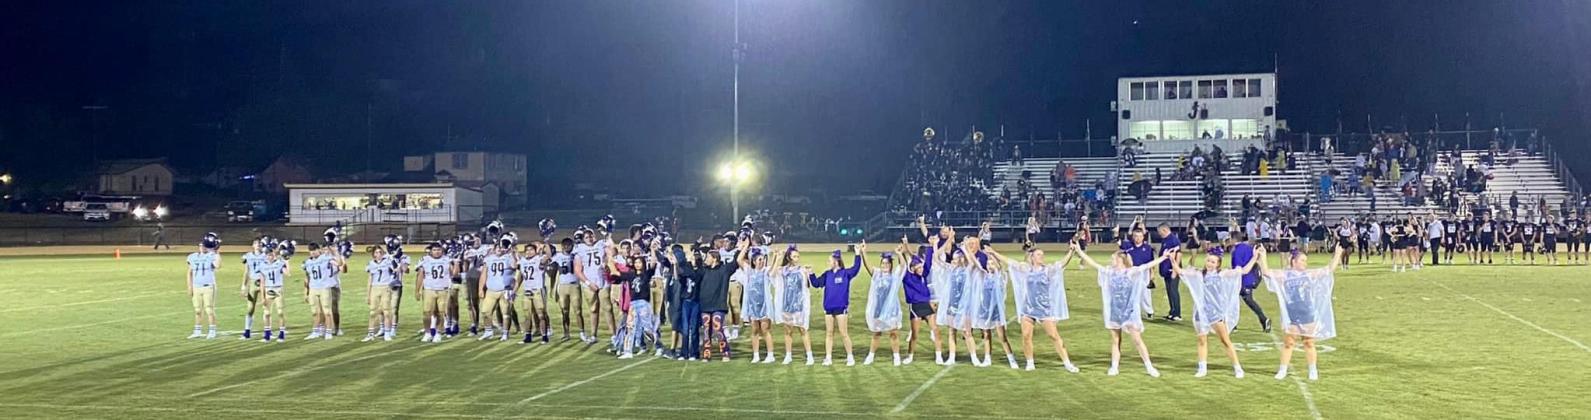 SSHS Cheer and Fans who traveled to Junction battling tough weather Photo courtesy of San Saba All Sports Booster Club